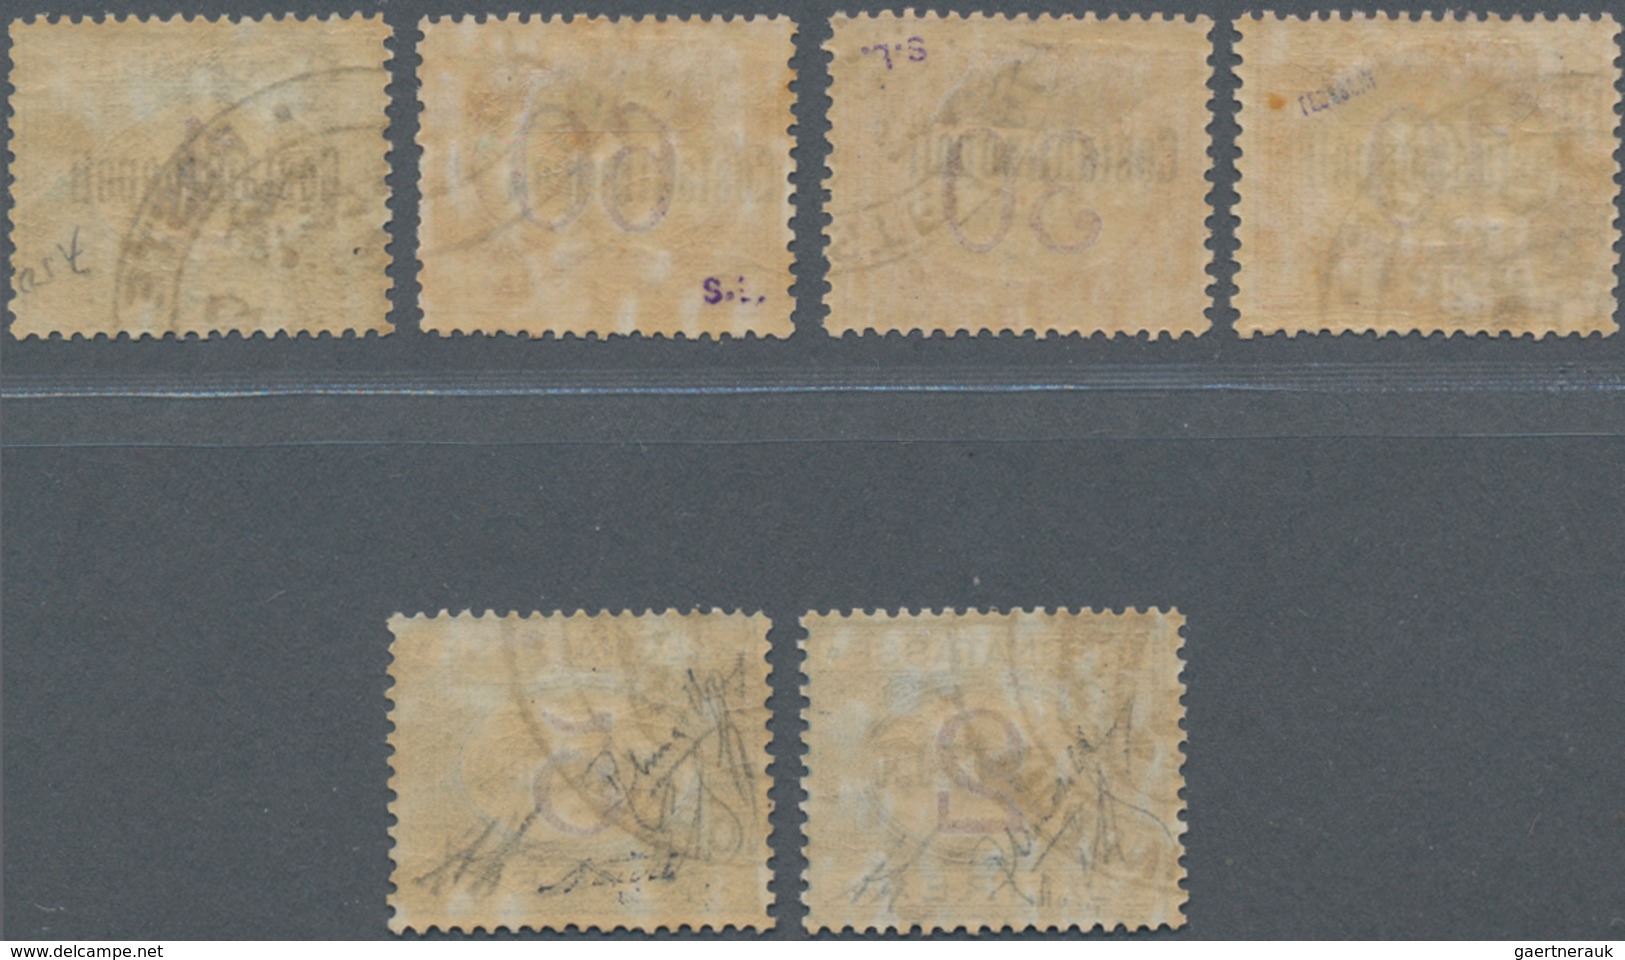 Italienische Post In Der Levante - Portomarken: 1922 Complete Set Of The Postage Due Stamps For The - General Issues